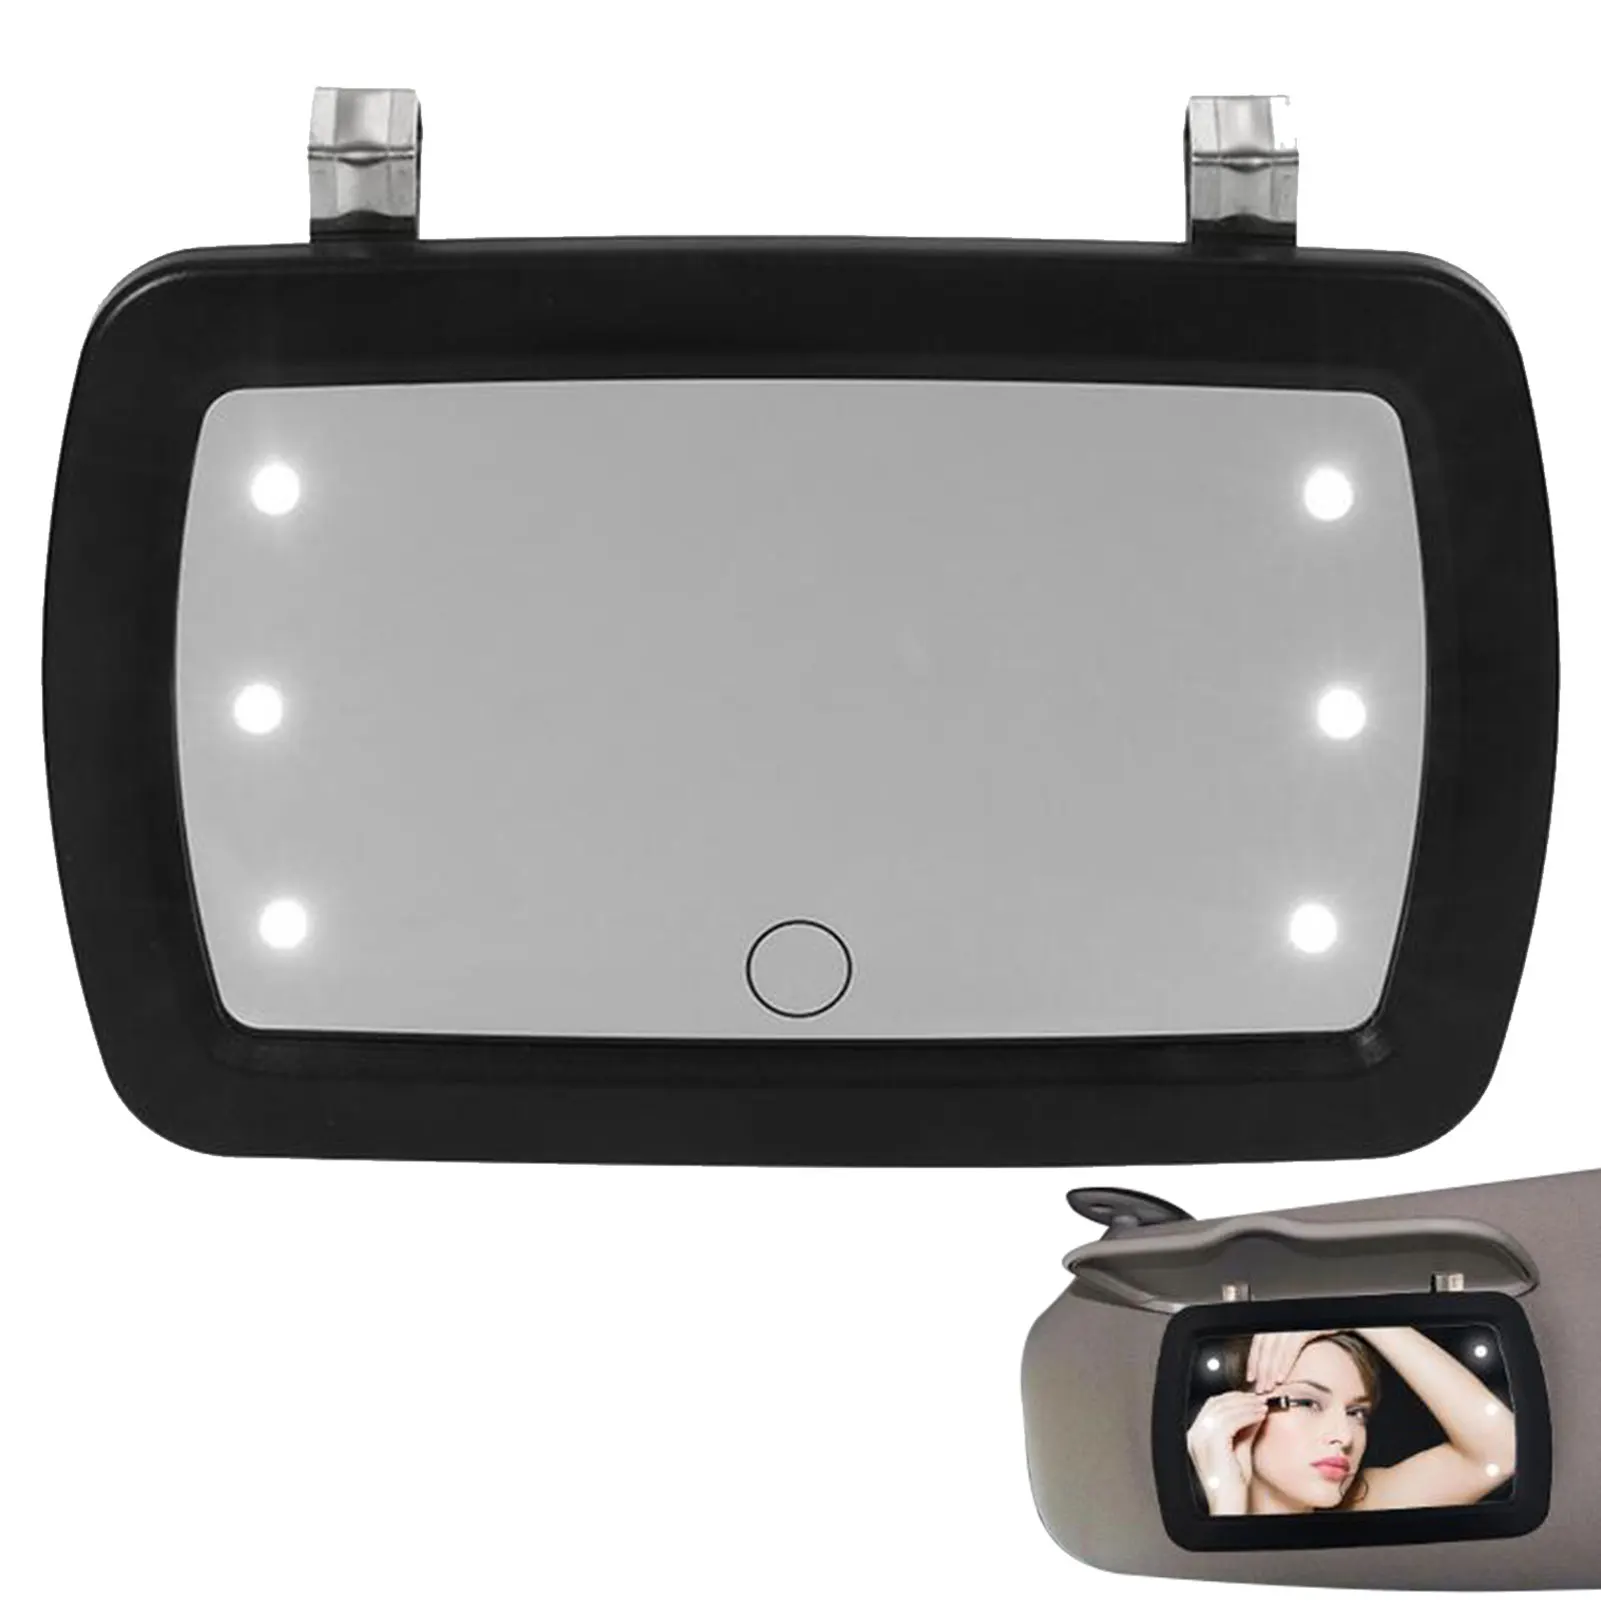 Car Sun Visor Vanity Mirror Car Makeup Mirror With 6 LED Lights Car Cosmetic Mirror With Built-in Battery Universal Rear View